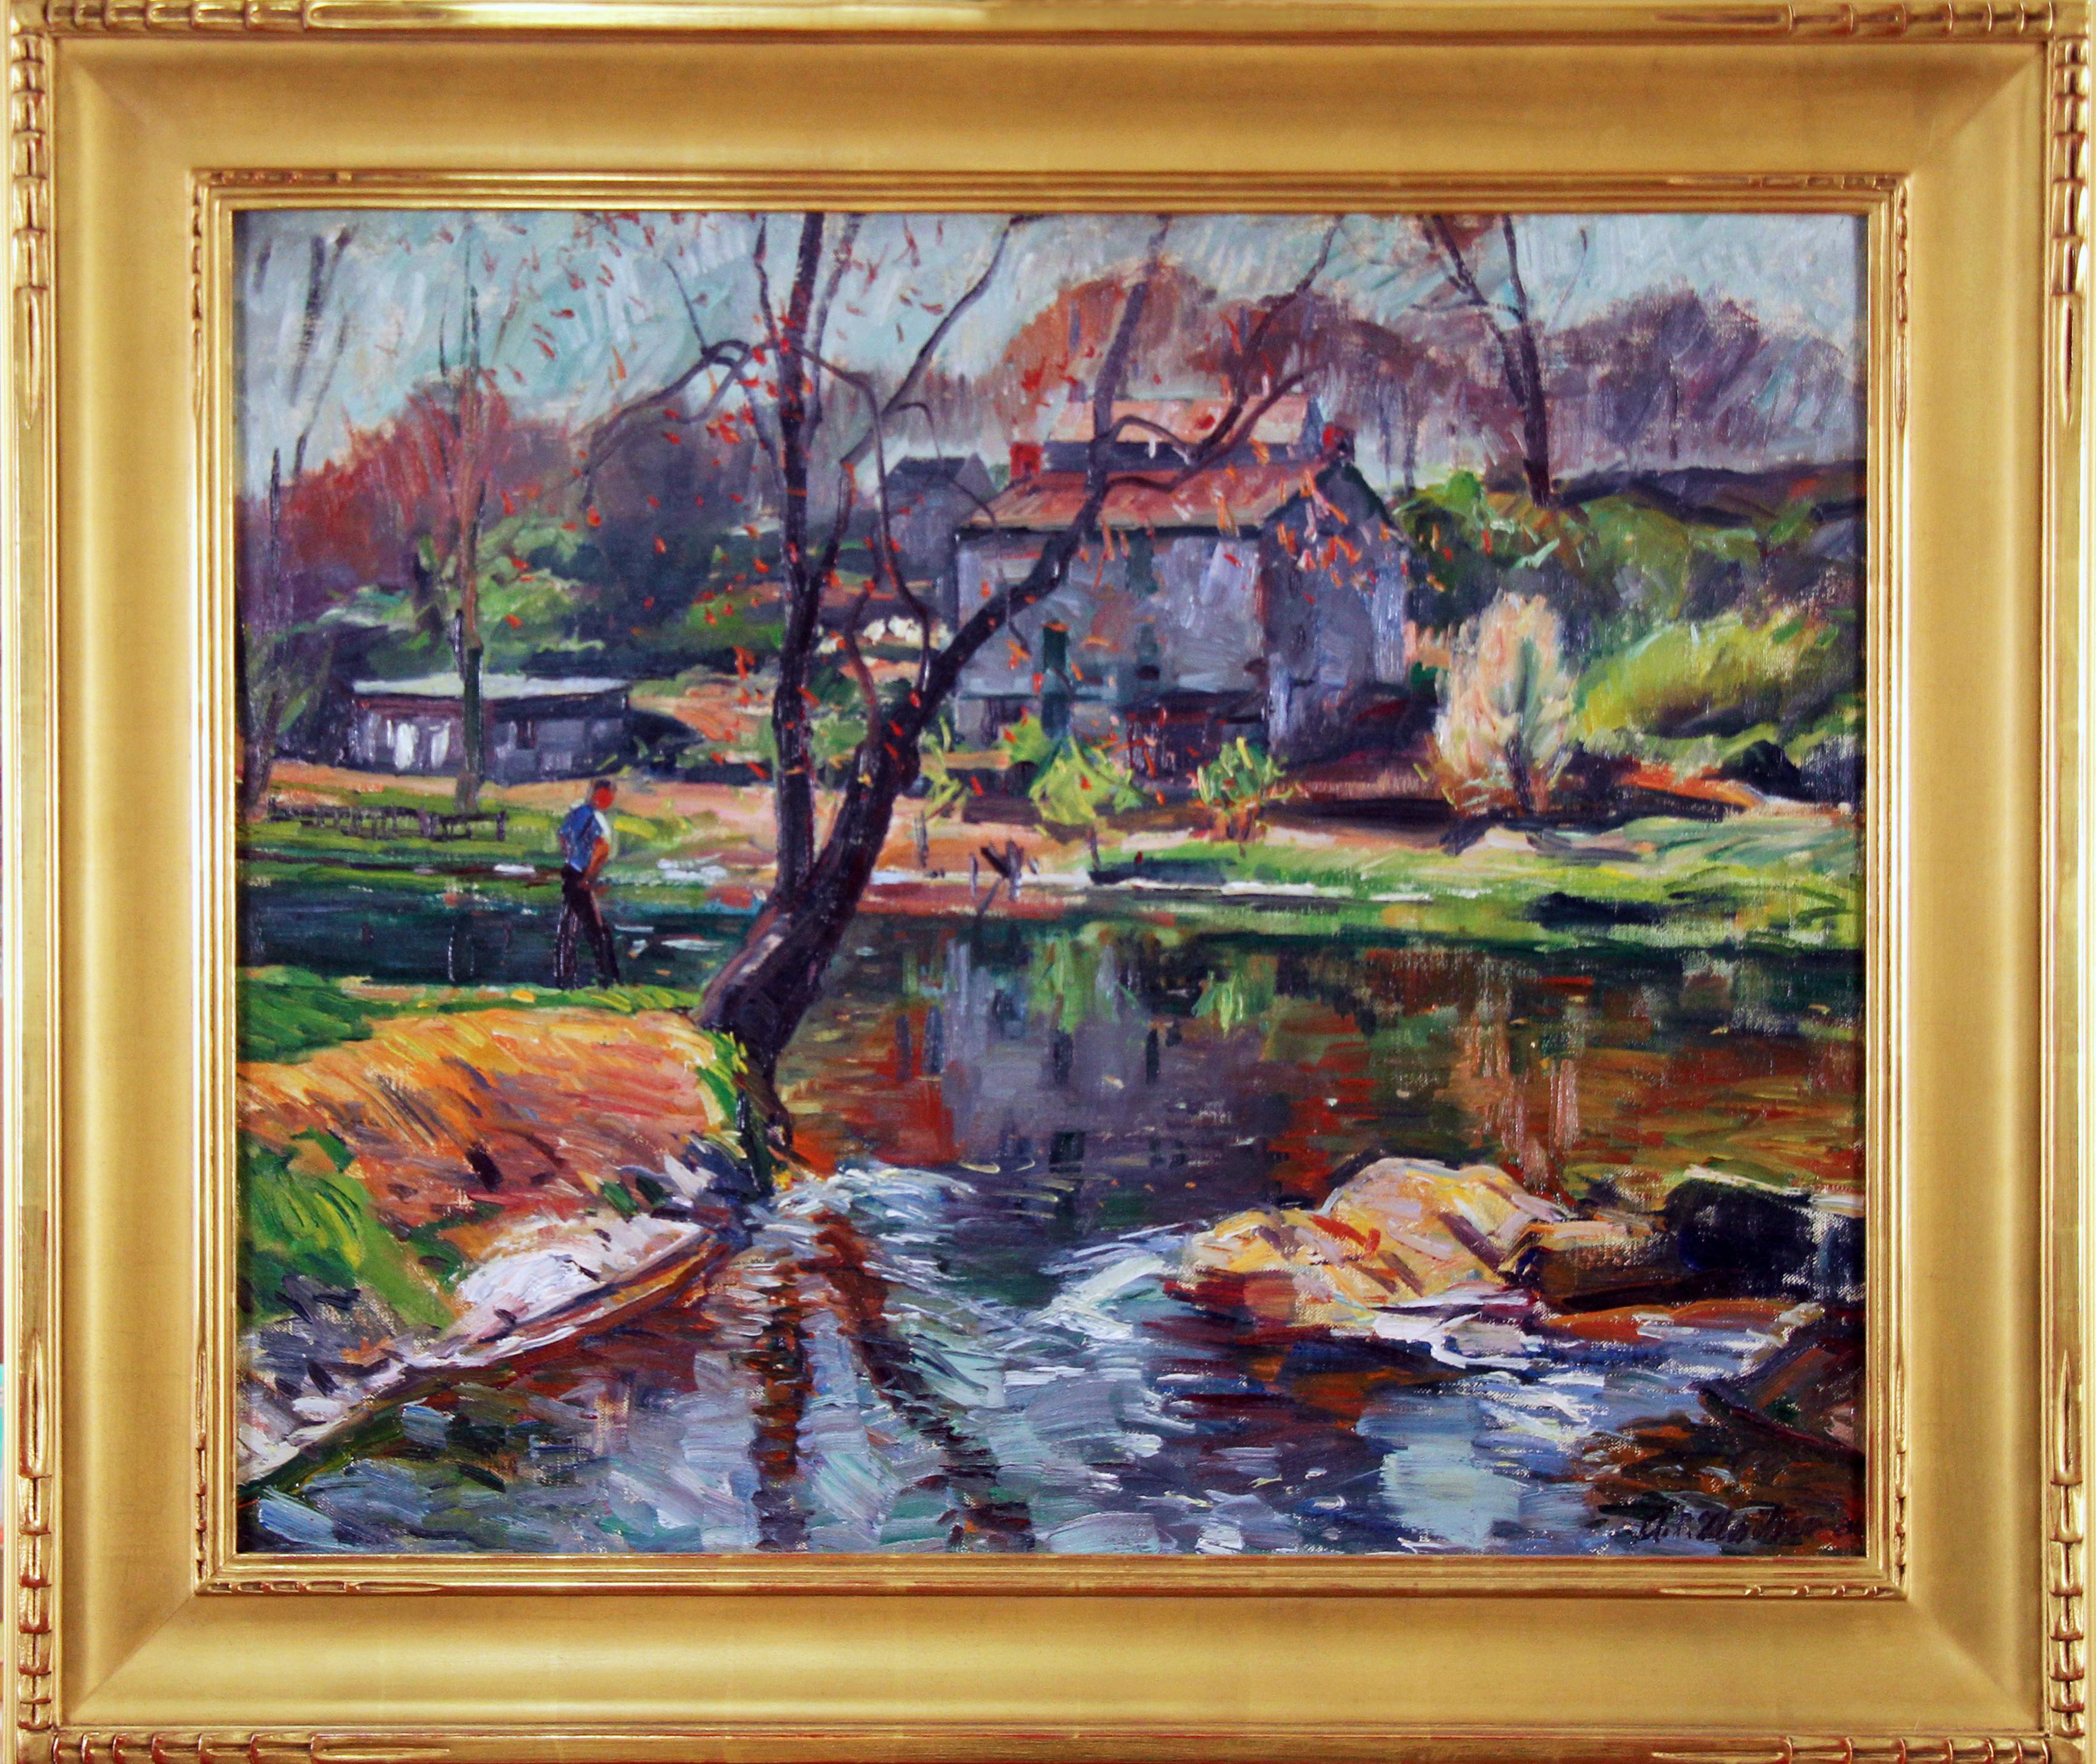 Landscape by River with Figure, American Impressionist, Oil on Canvas - Painting by Antonio Pietro Martino